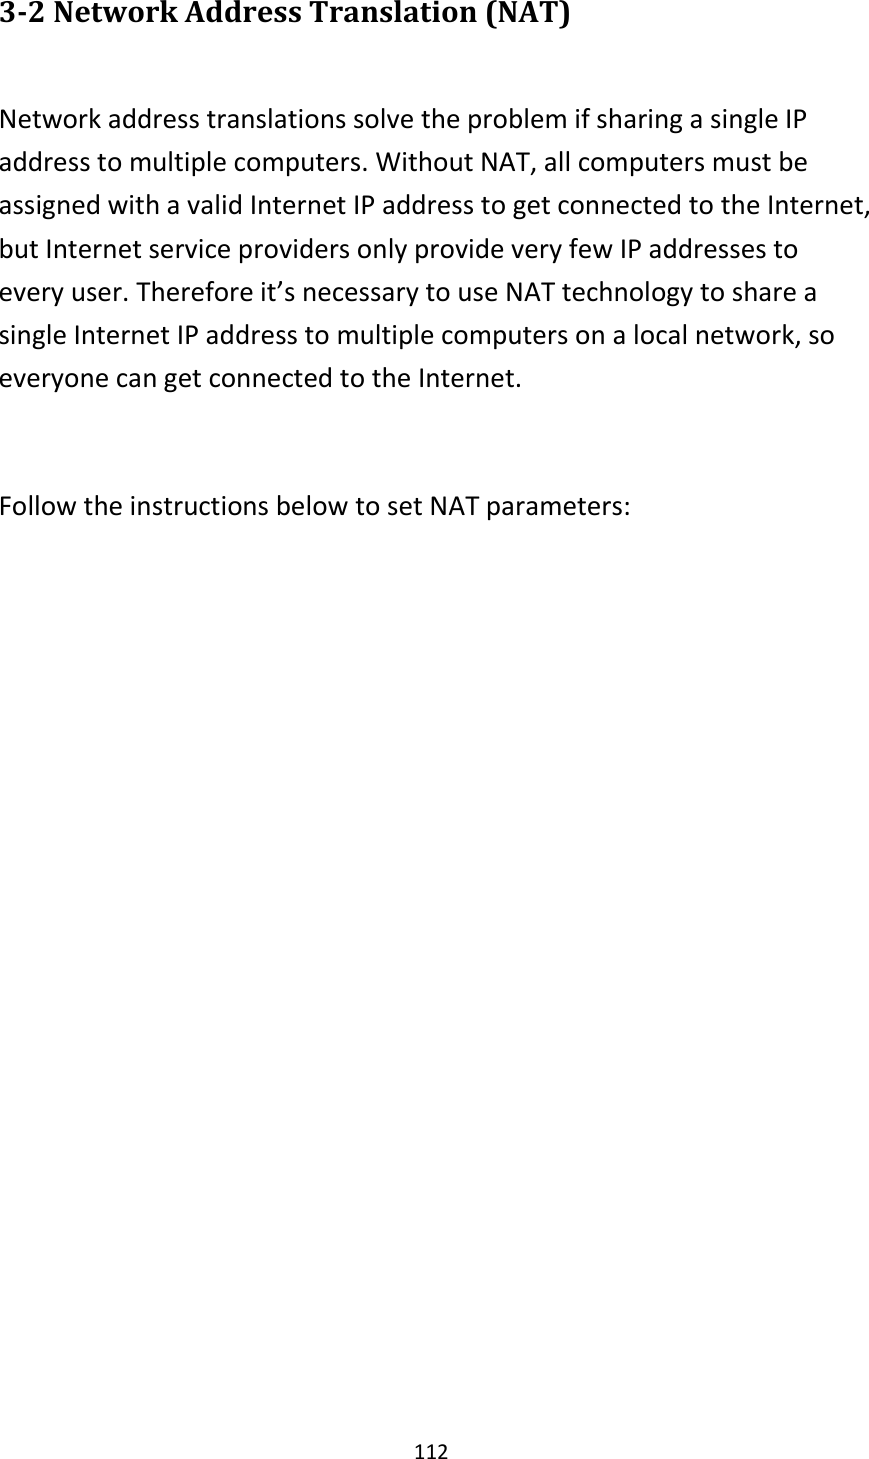 112 3-2 Network Address Translation (NAT)  Network address translations solve the problem if sharing a single IP address to multiple computers. Without NAT, all computers must be assigned with a valid Internet IP address to get connected to the Internet, but Internet service providers only provide very few IP addresses to every user. Therefore it’s necessary to use NAT technology to share a single Internet IP address to multiple computers on a local network, so everyone can get connected to the Internet.    Follow the instructions below to set NAT parameters:   